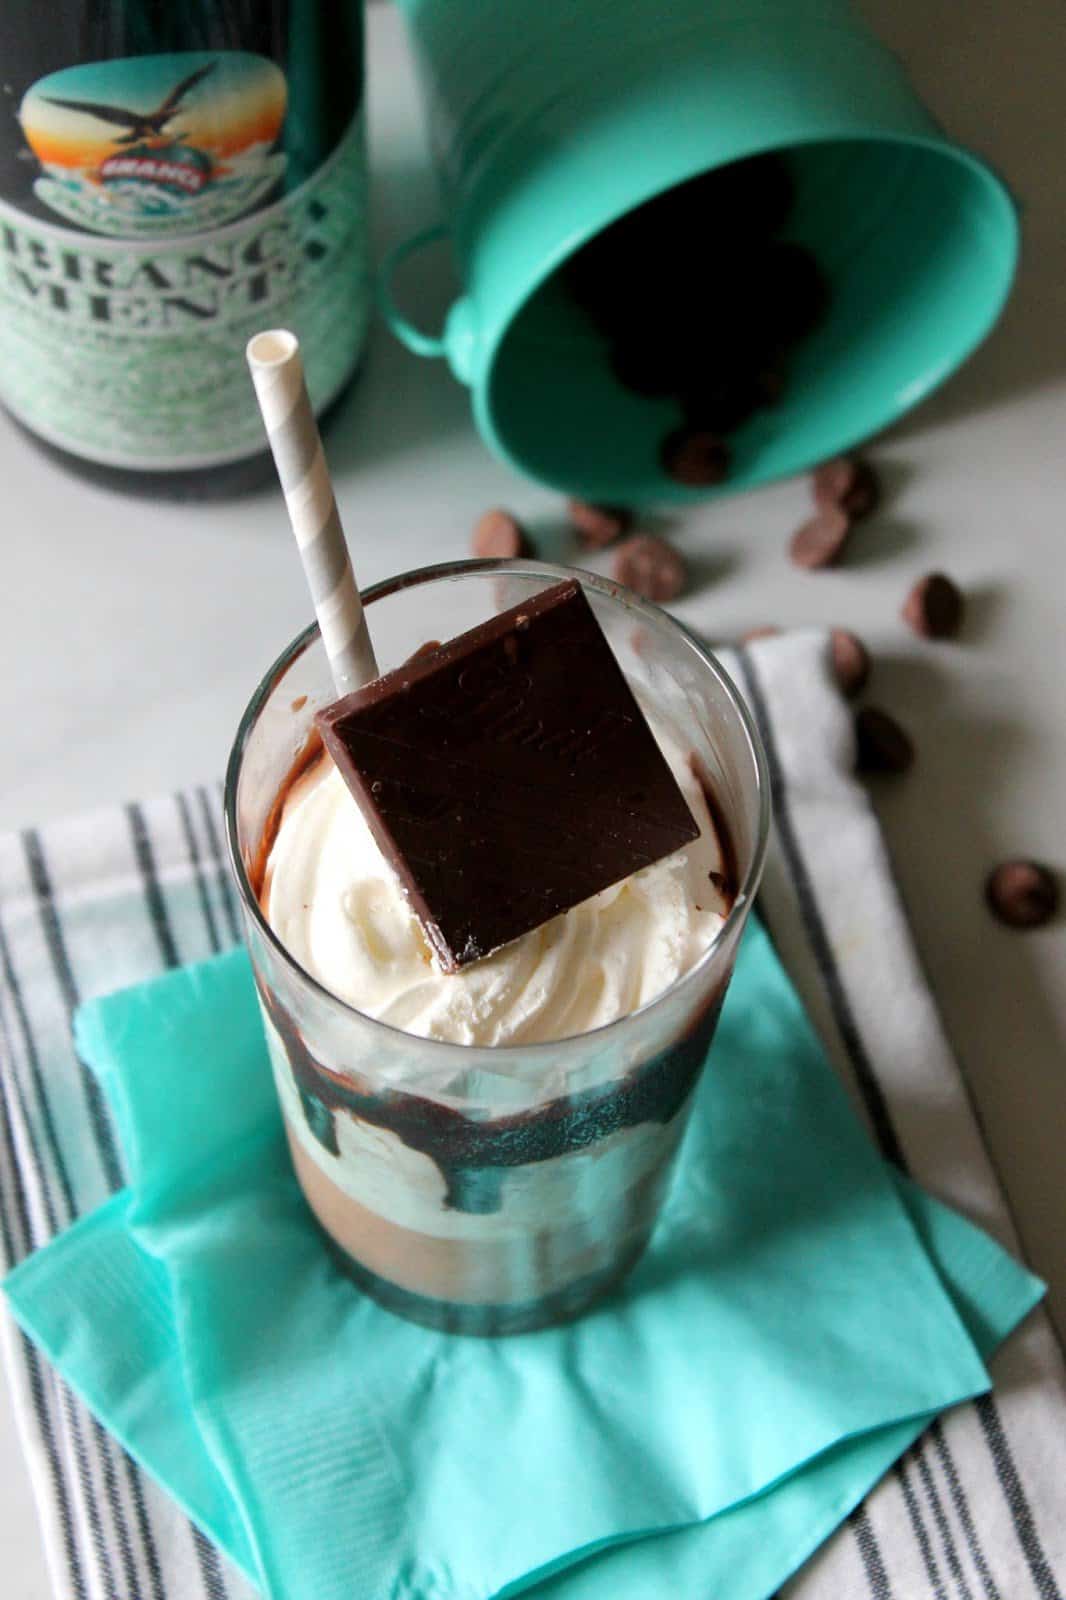 A spiked chocolate mint milkshake topped with whipped cream and a chocolate square.